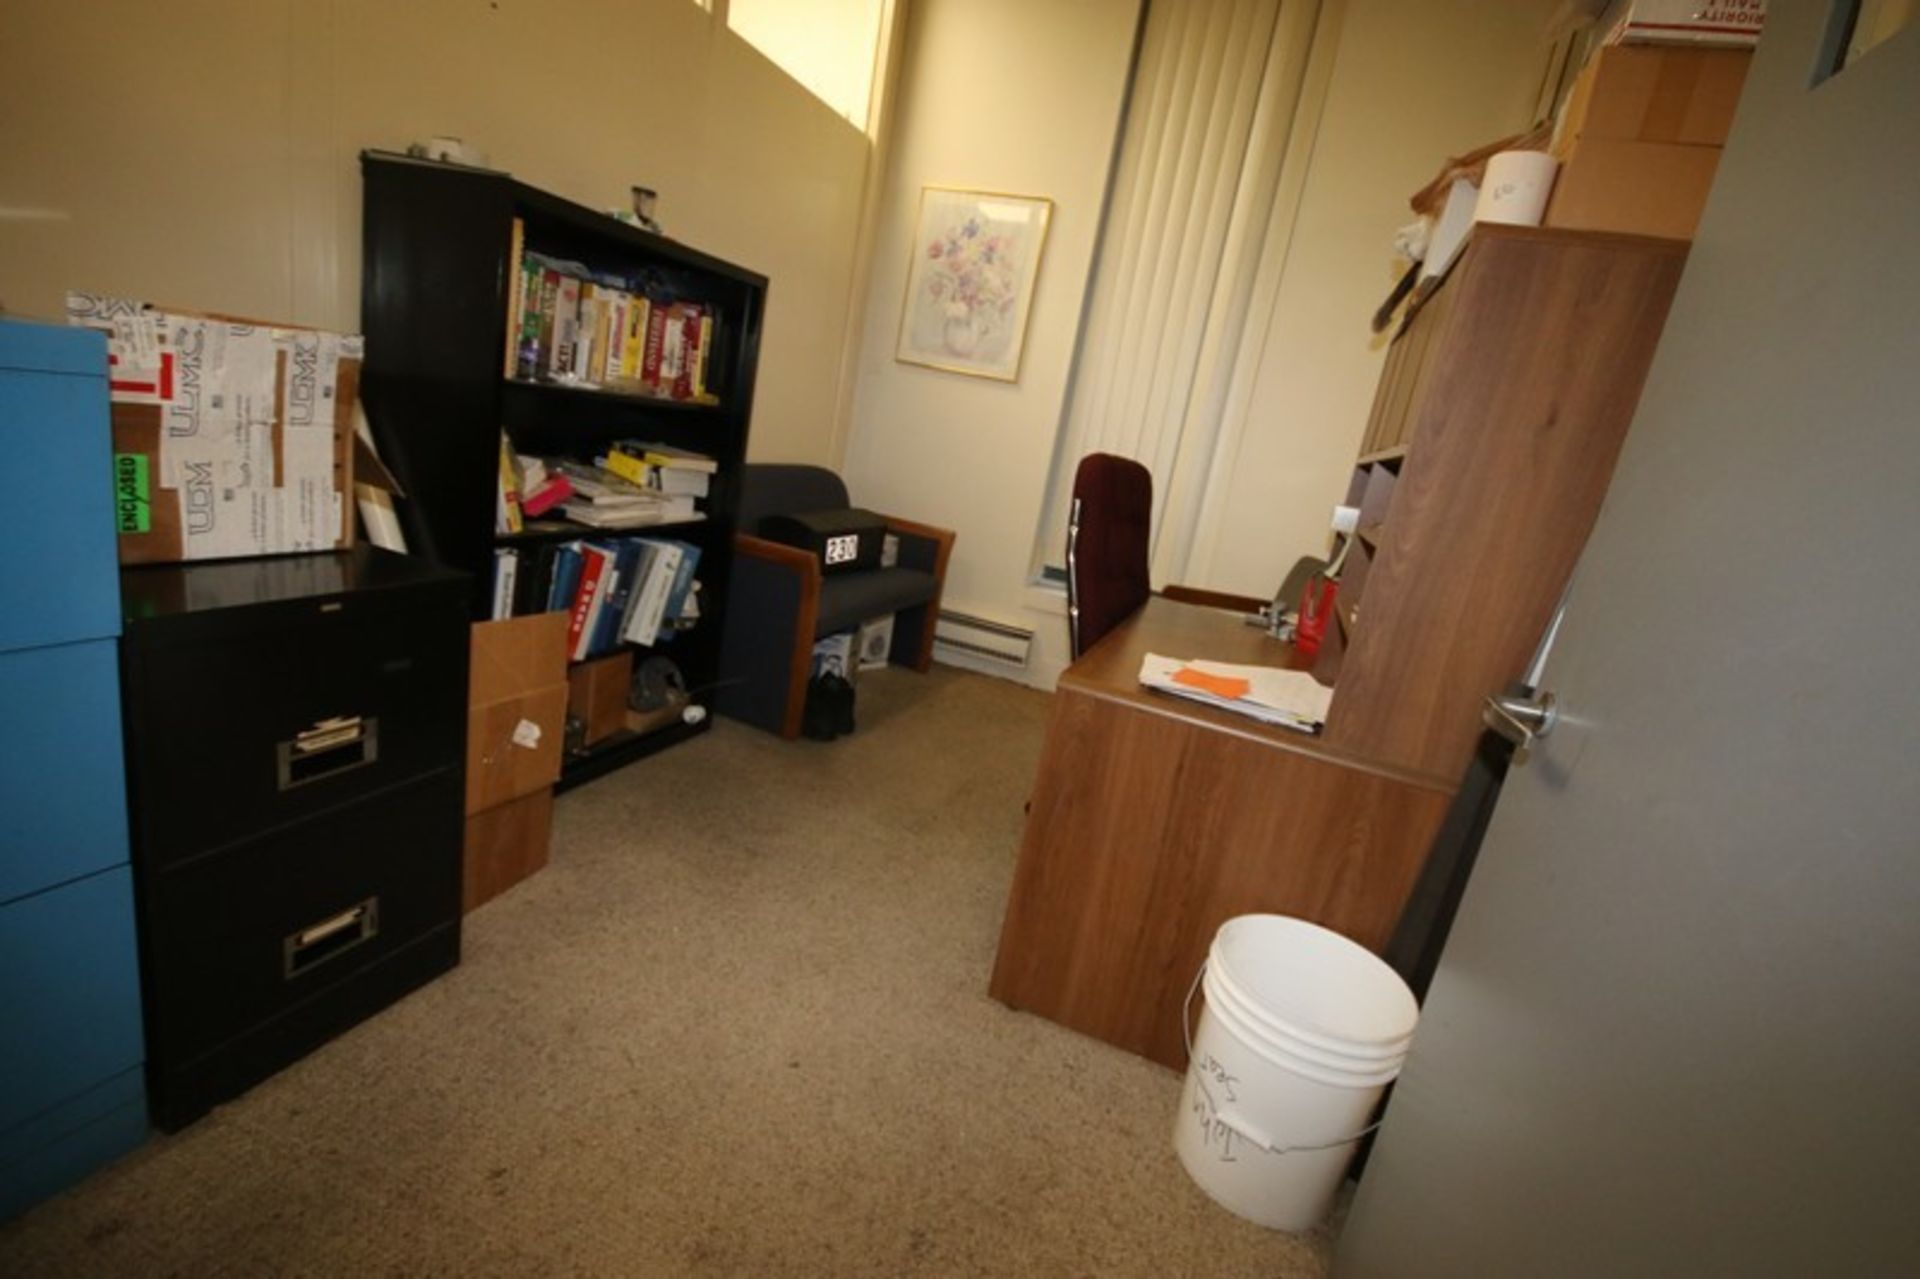 Contents of Room, Includes Spare Cabinets, Horizontal Filing Cabinets, Shelving, Rolling Chair, - Image 3 of 3